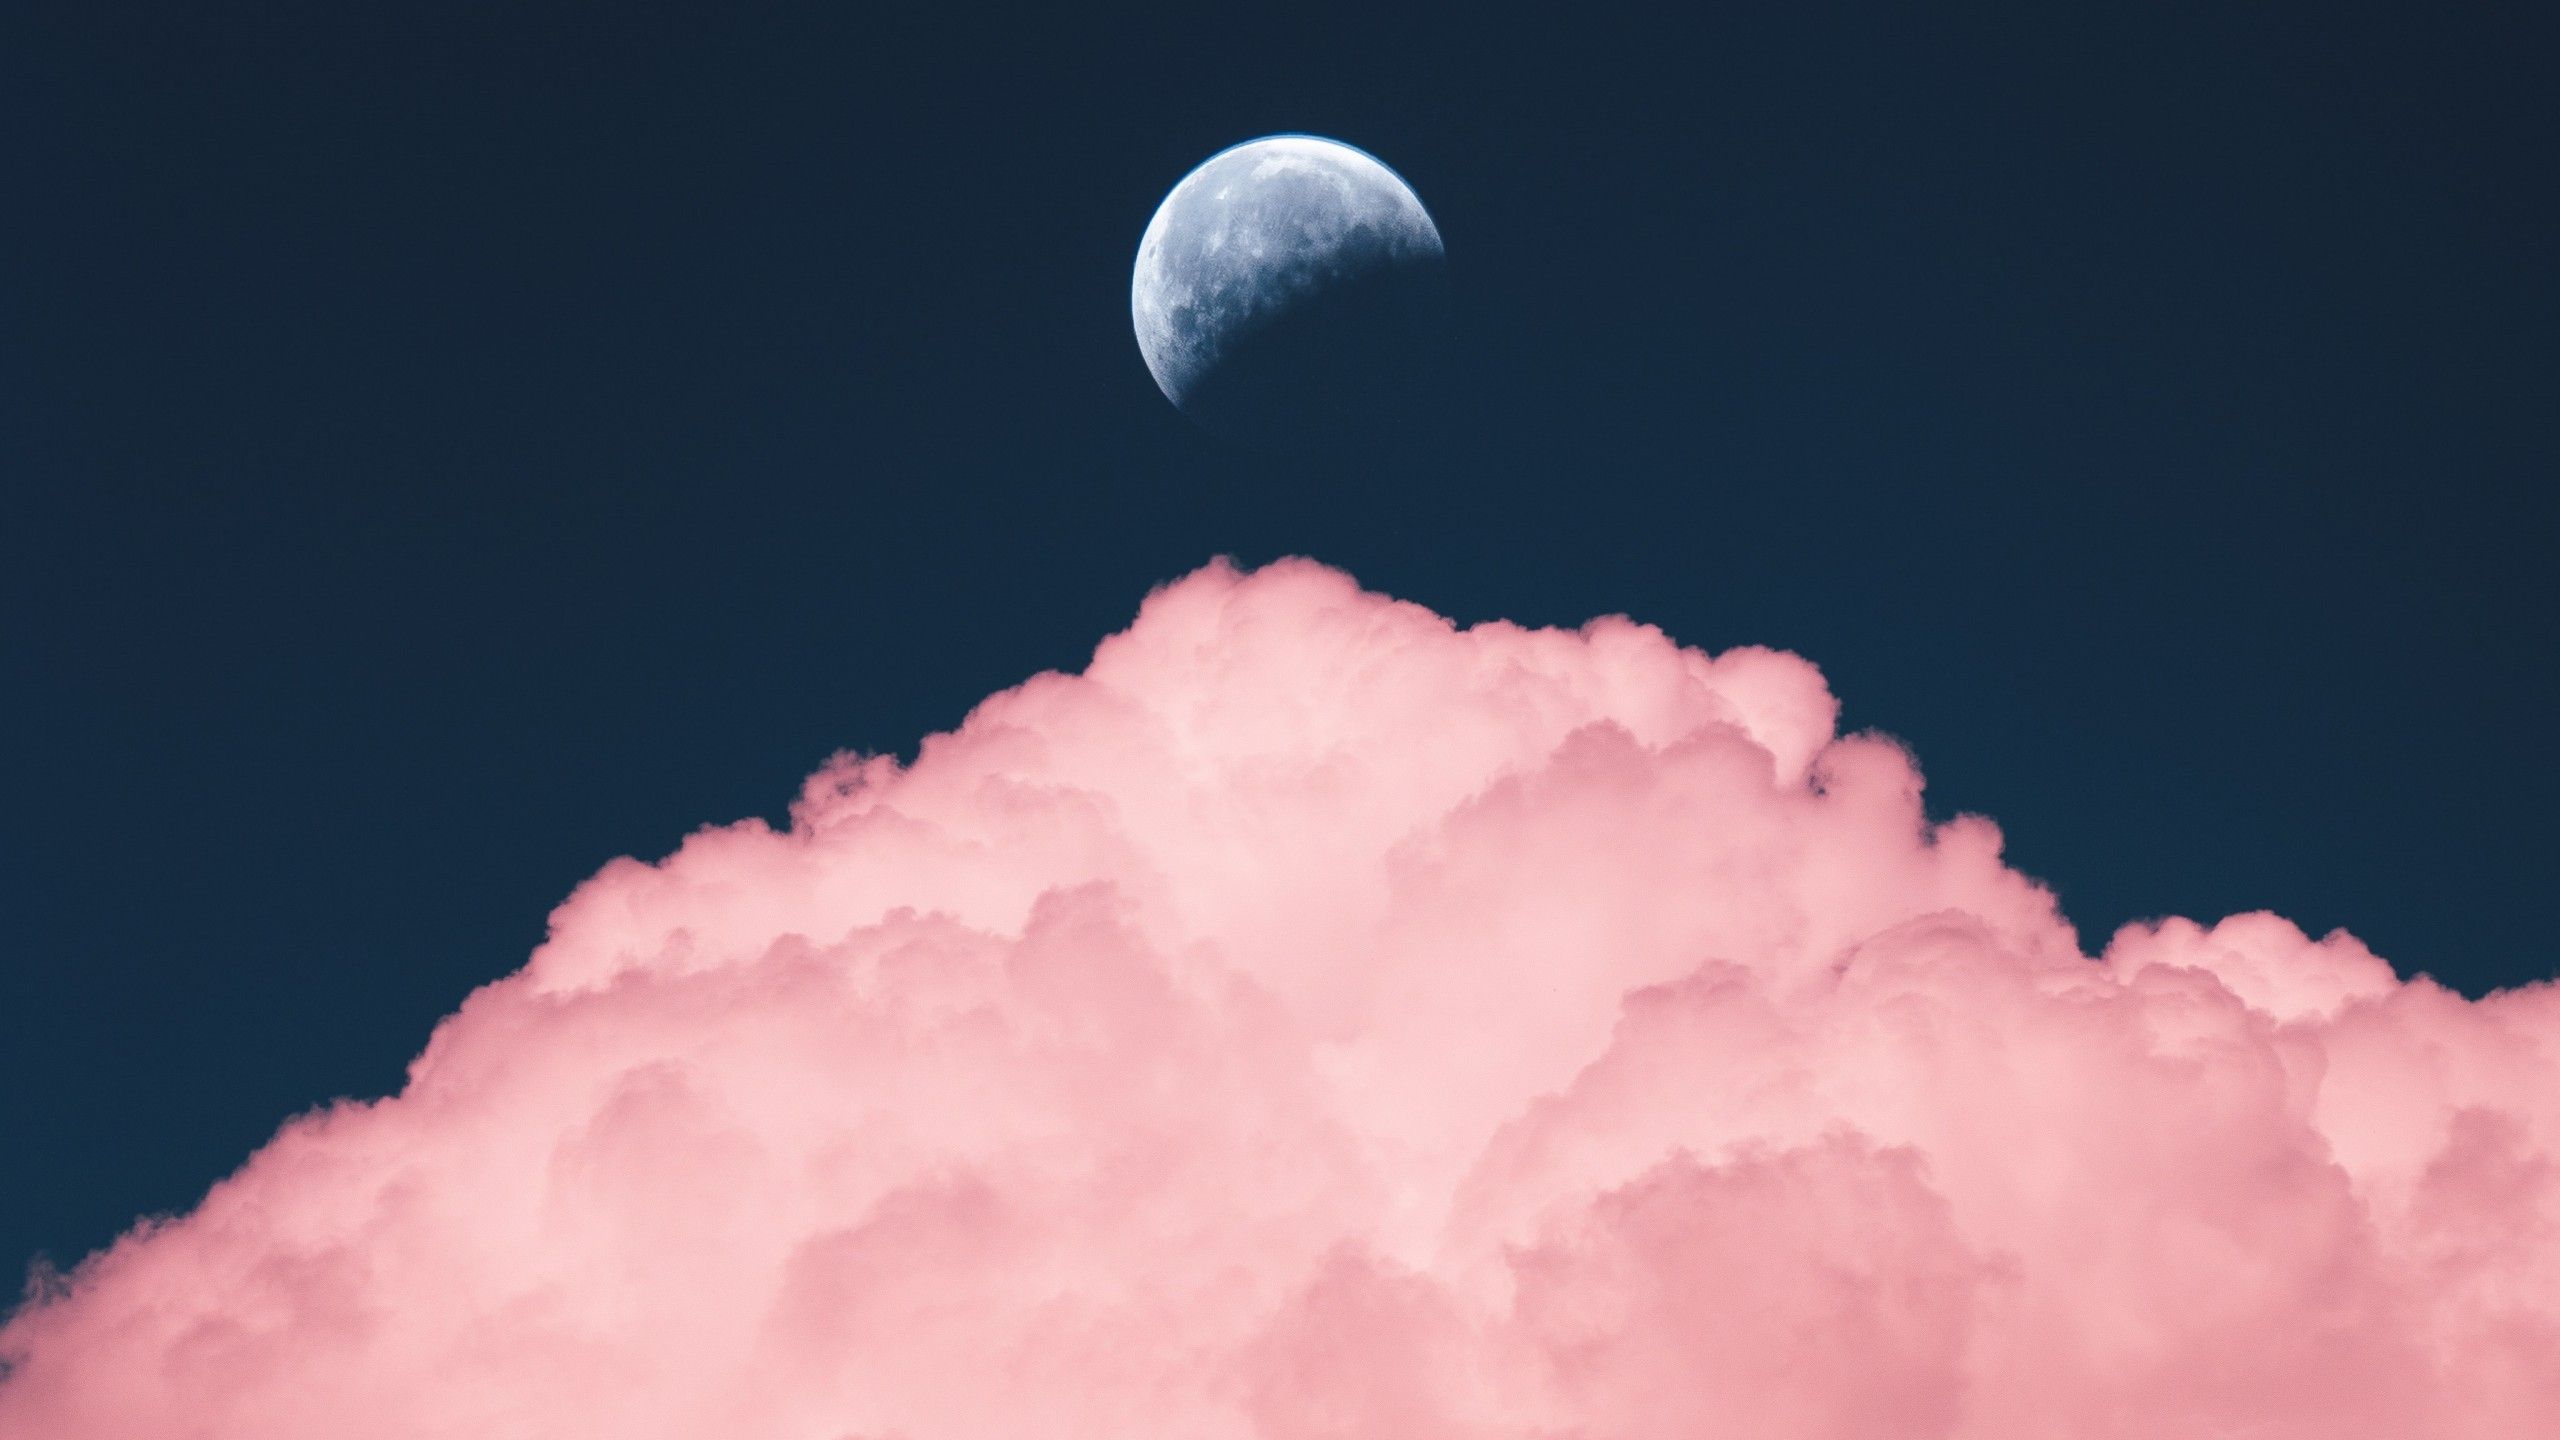 Download 2560x1440 Pink Clouds, Moon, Shiny Wallpaper for iMac 27